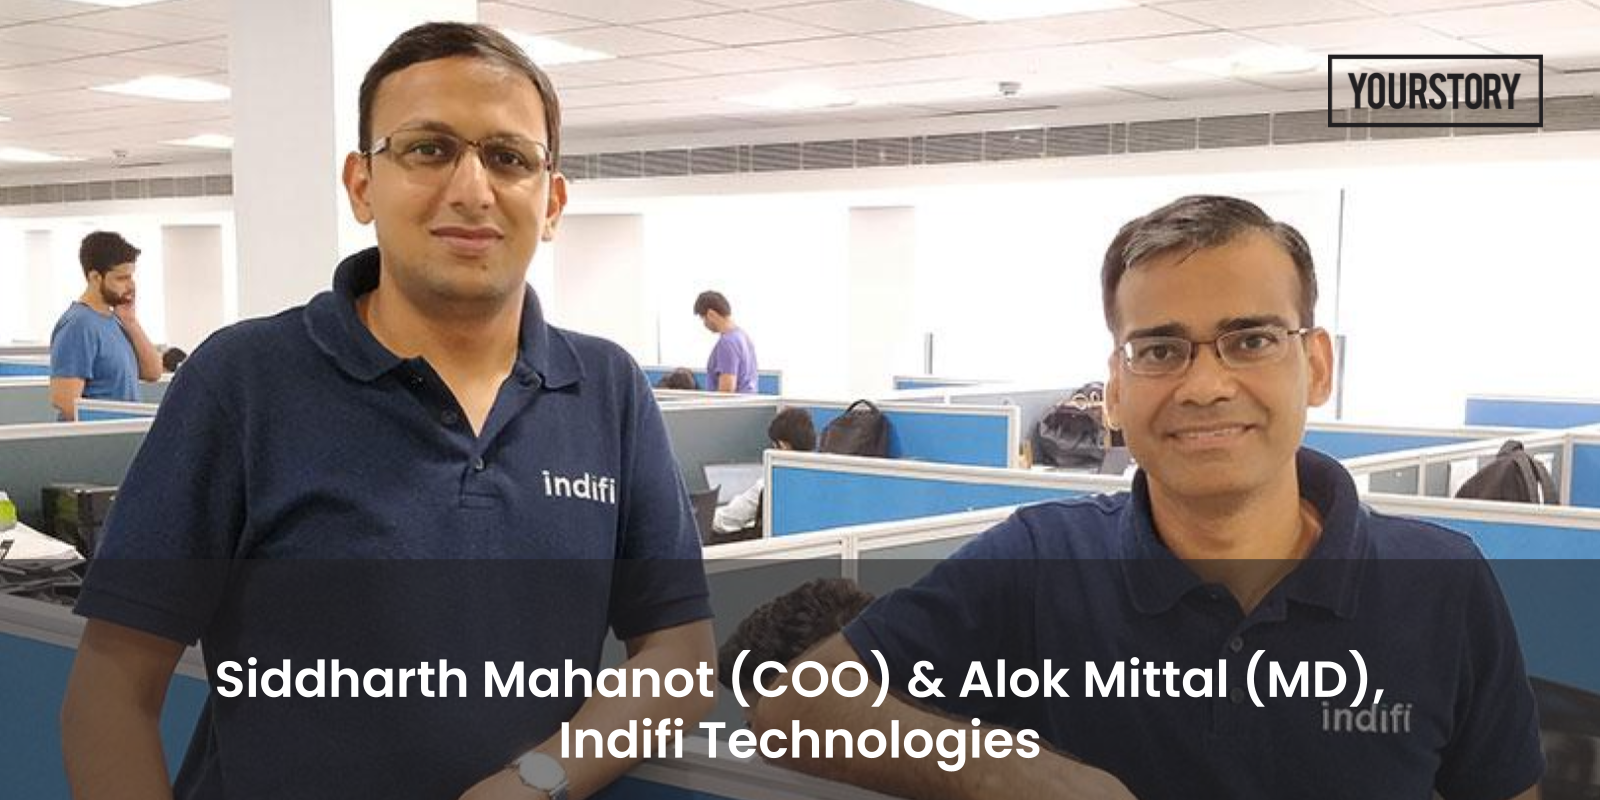 [Funding alert] Indifi raises Rs 340 Cr in Series D equity and debt funding round